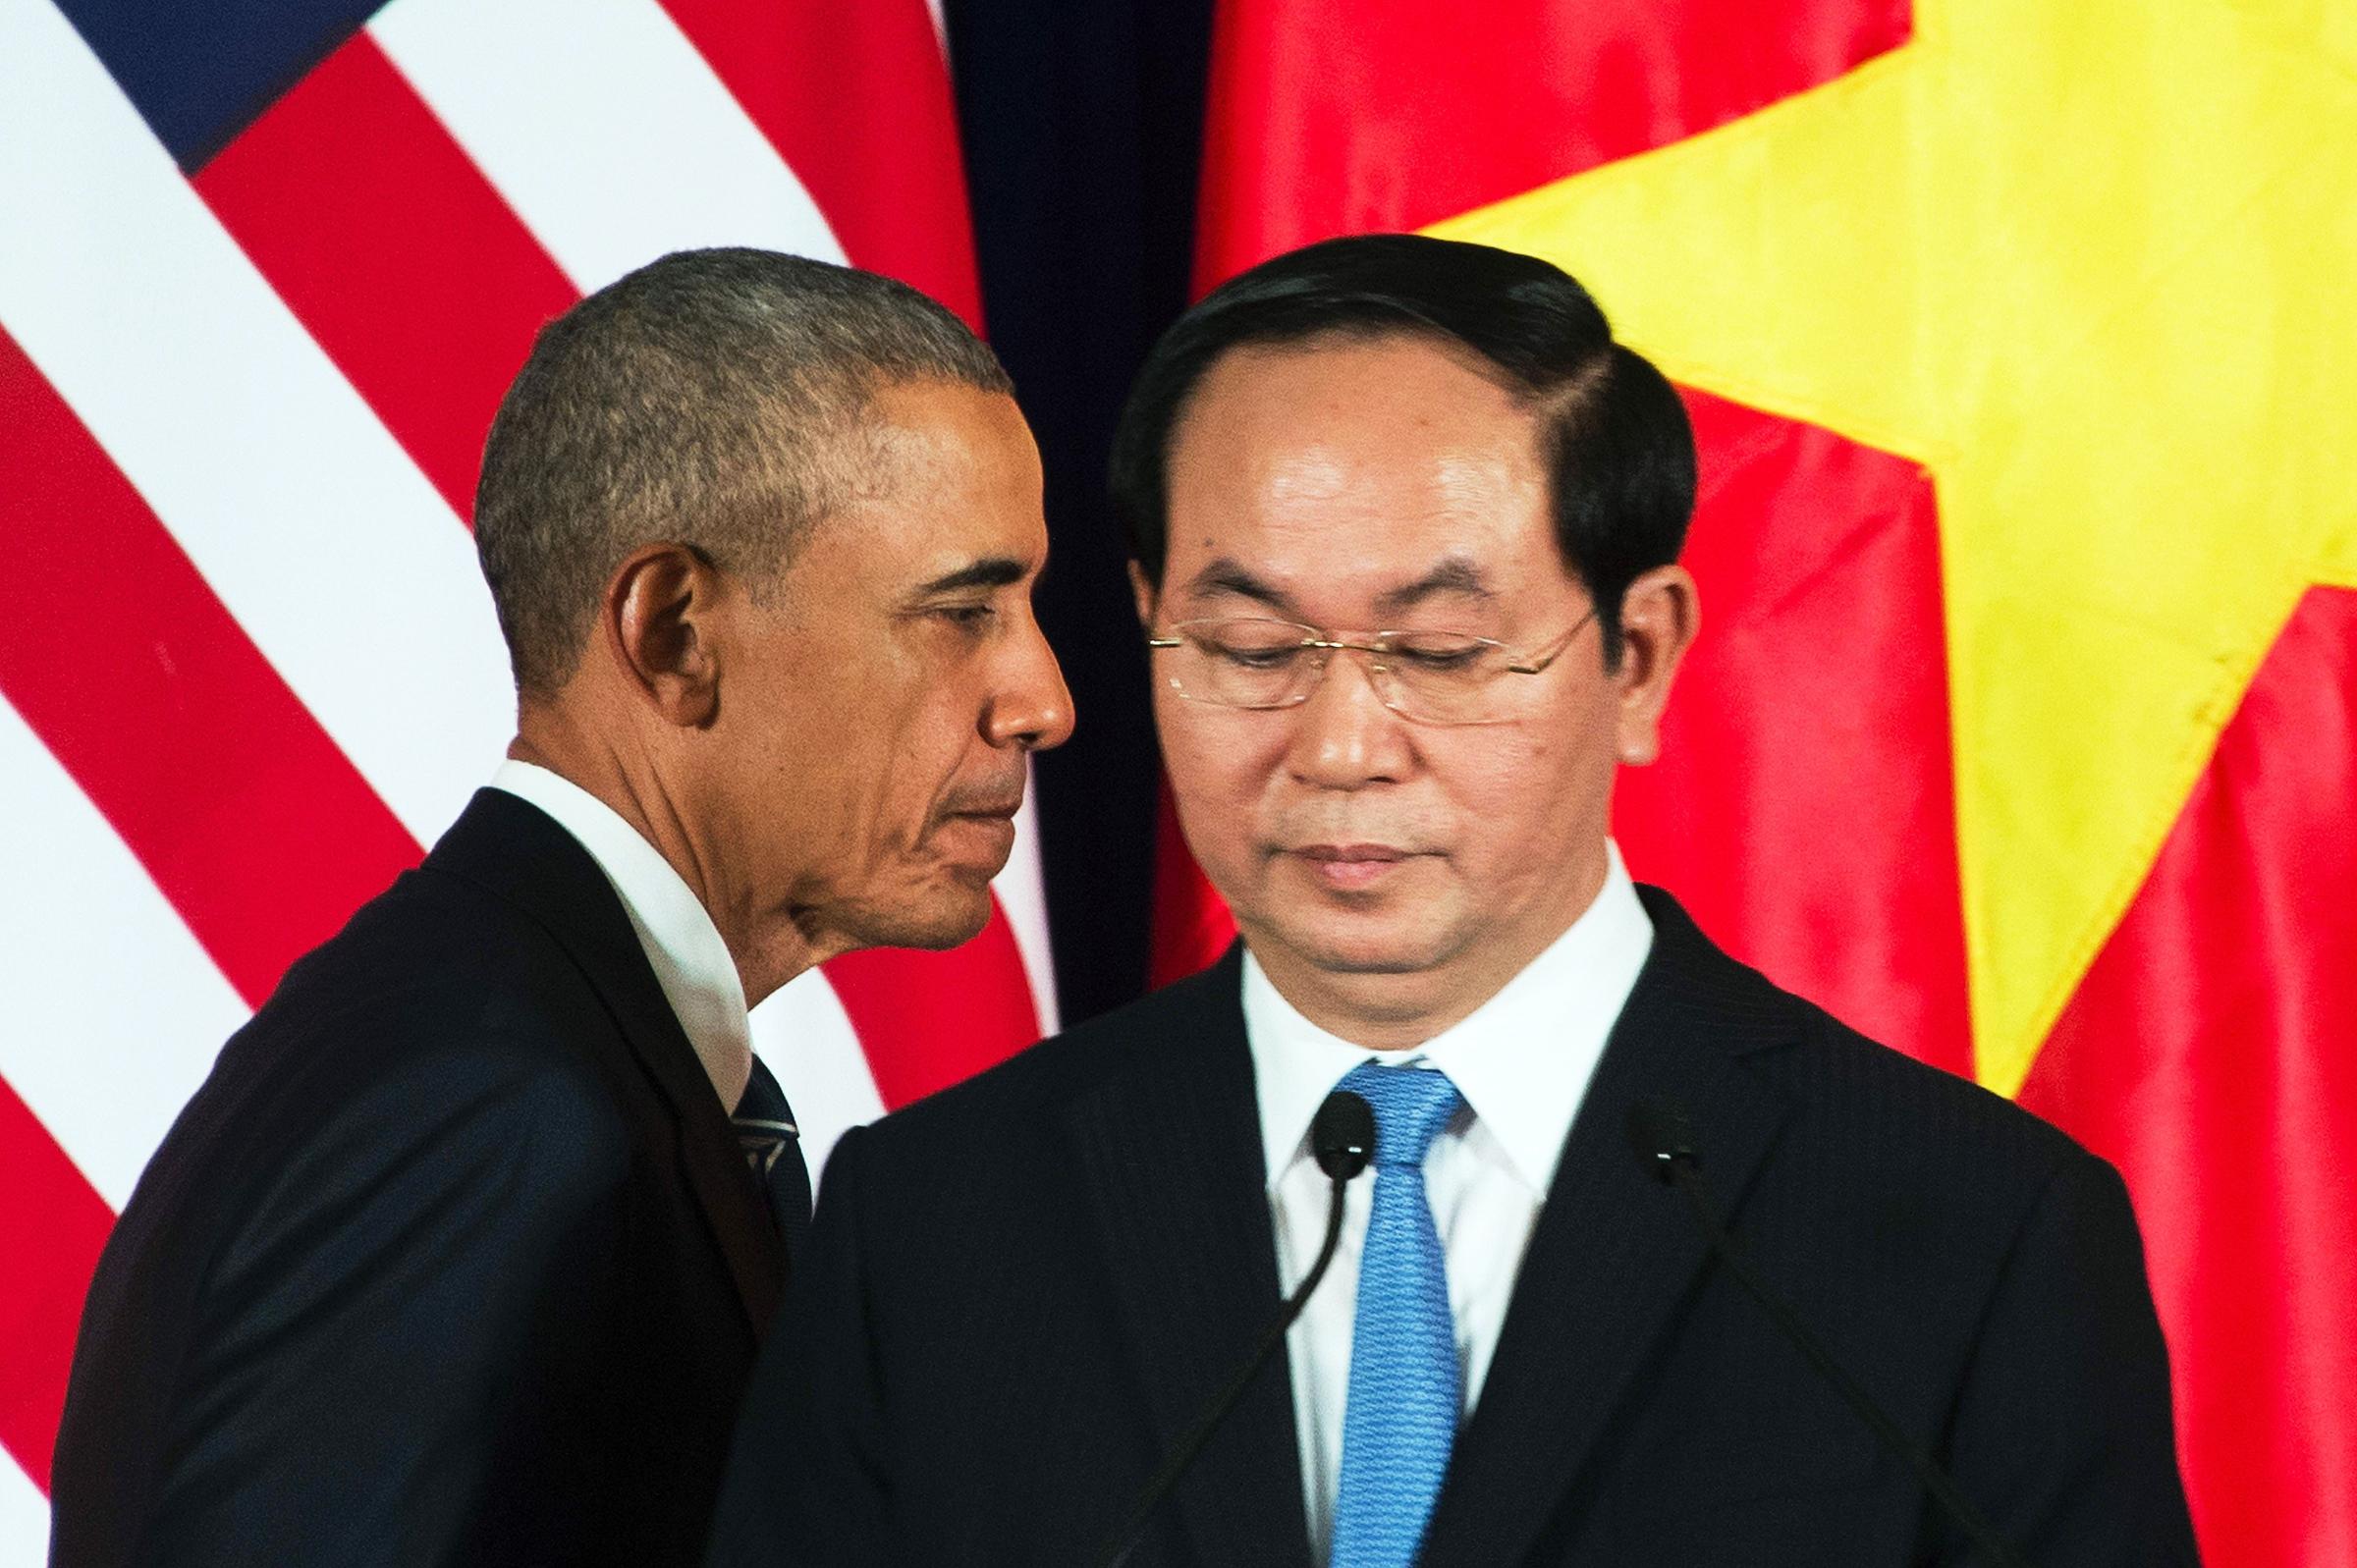 President Barack Obama and President Tran Dai Quang take part in a joint press conference in Hanoi on May 23.